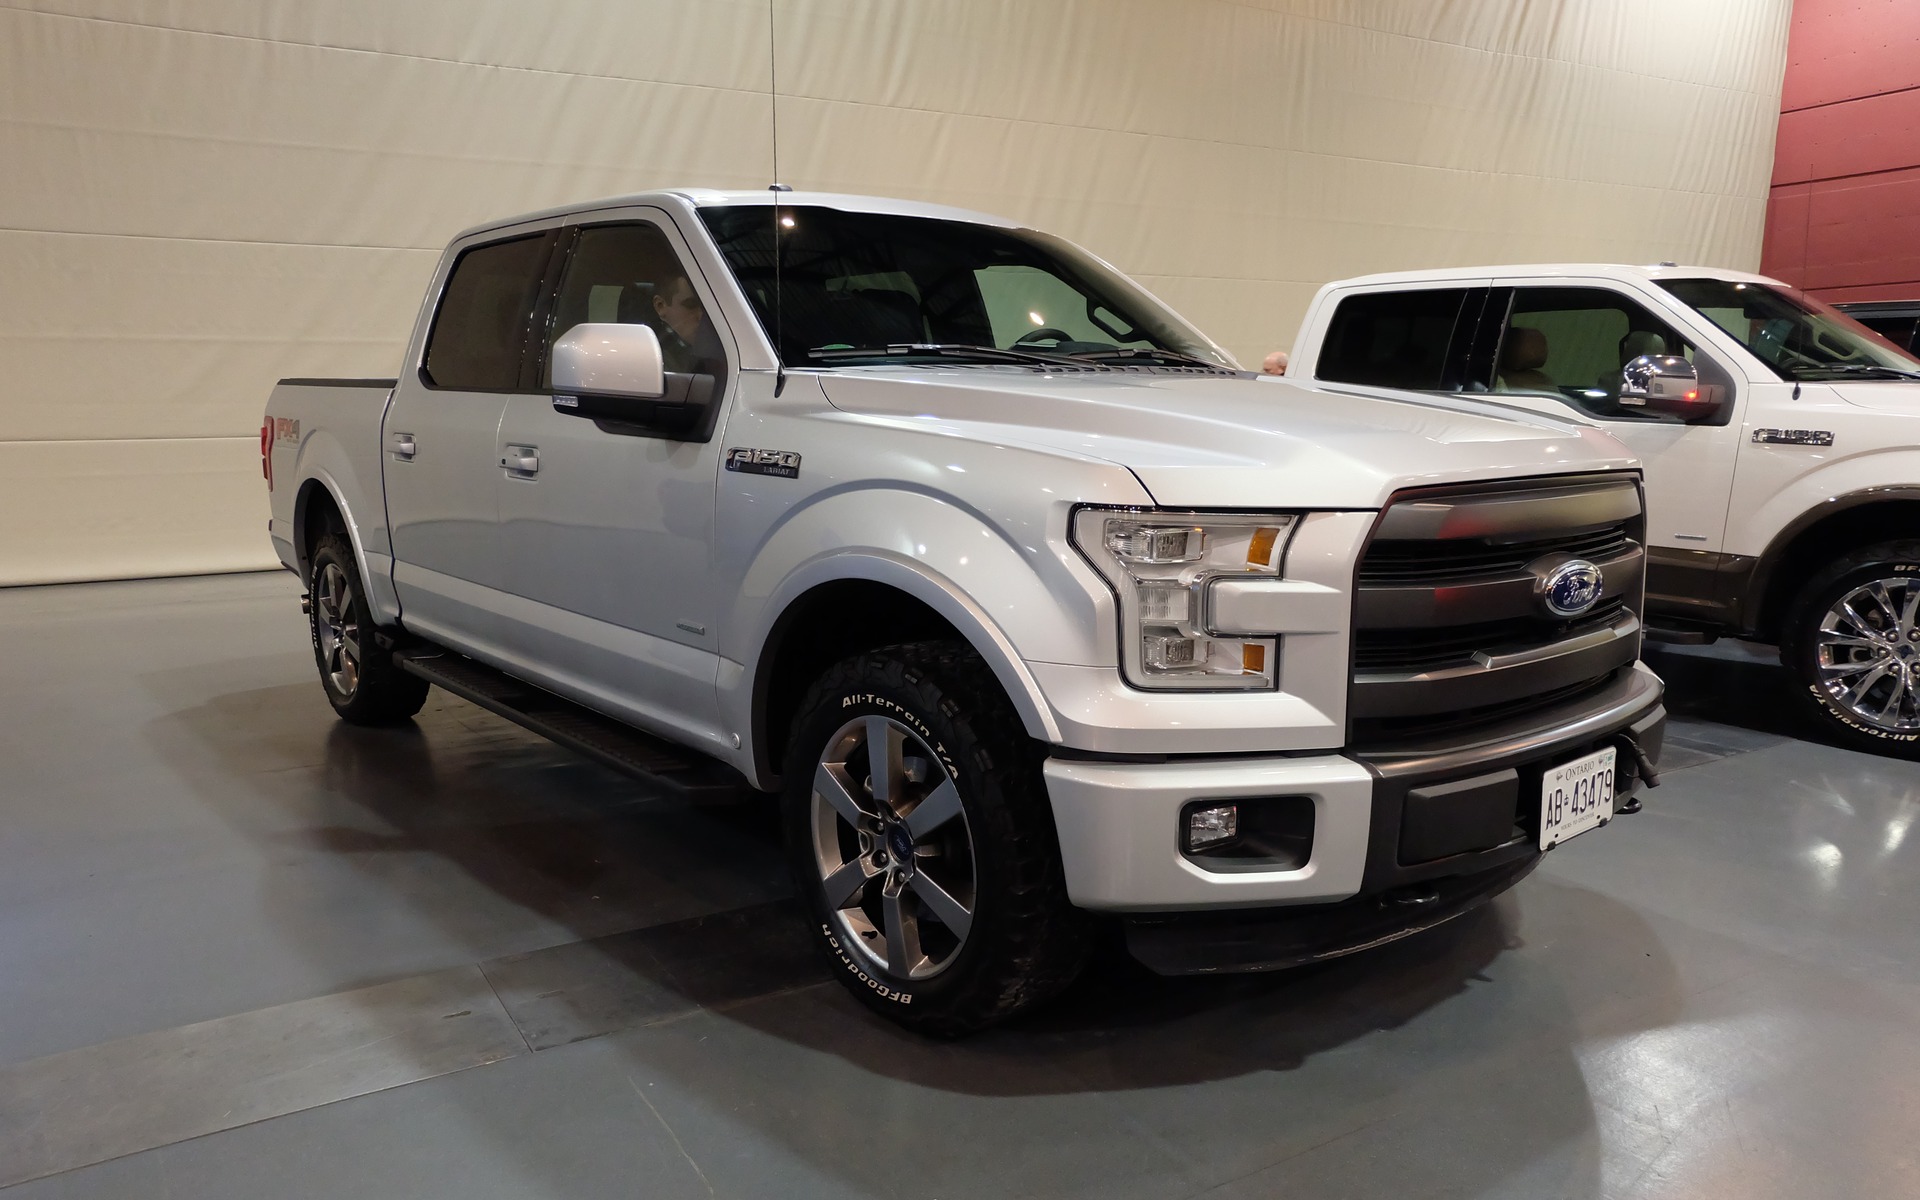 The first F-150 I drove: a silver-grey XLT.